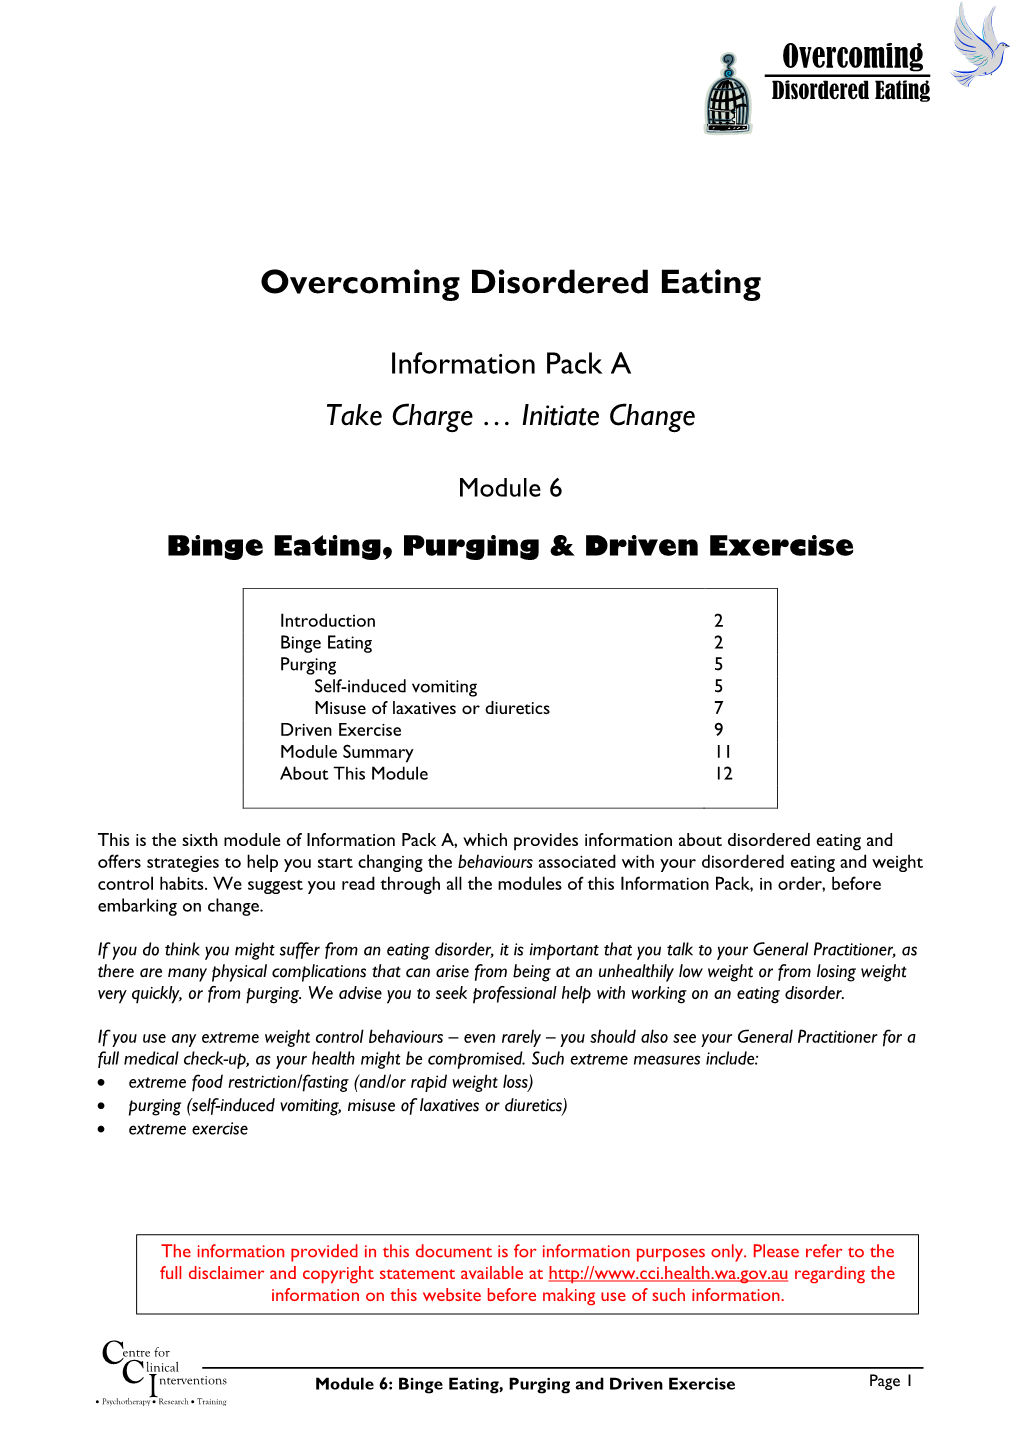 Module 6 Binge Eating, Purging and Driven Exercise